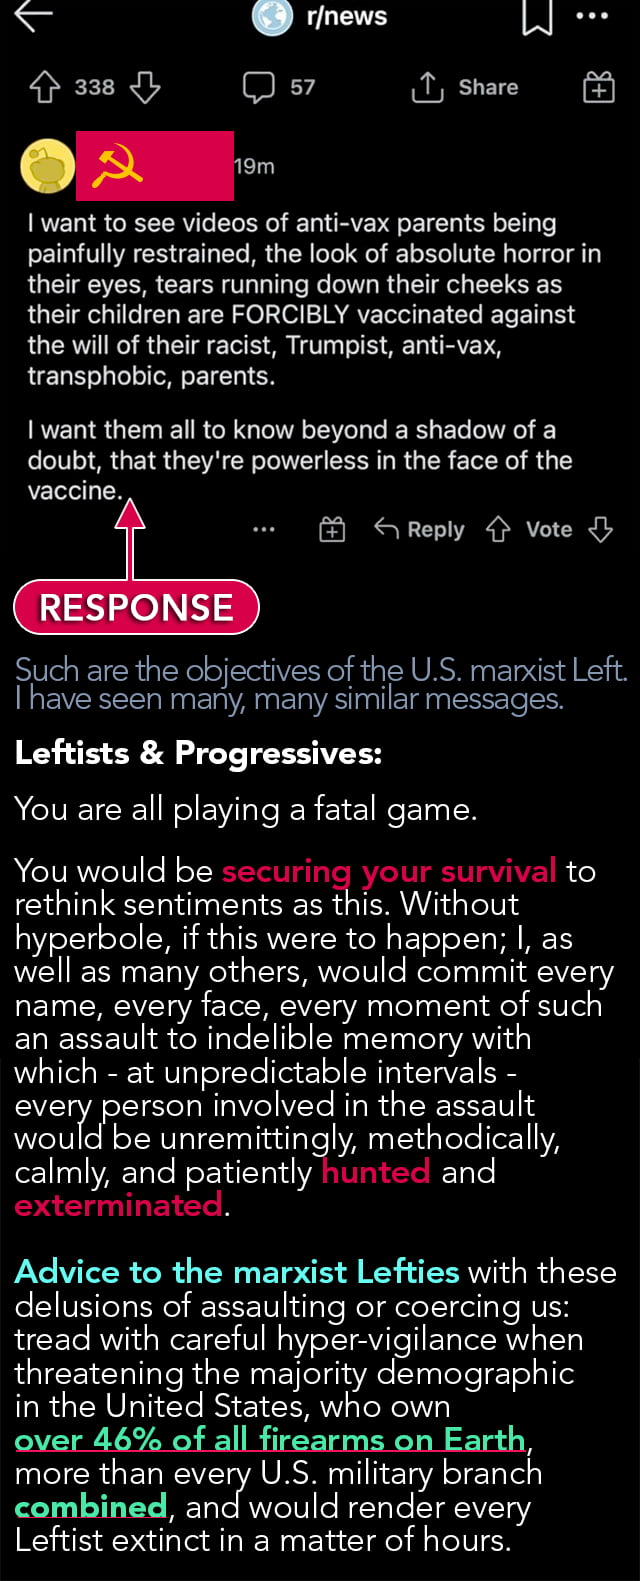 the first part is COMMON among the Leftists